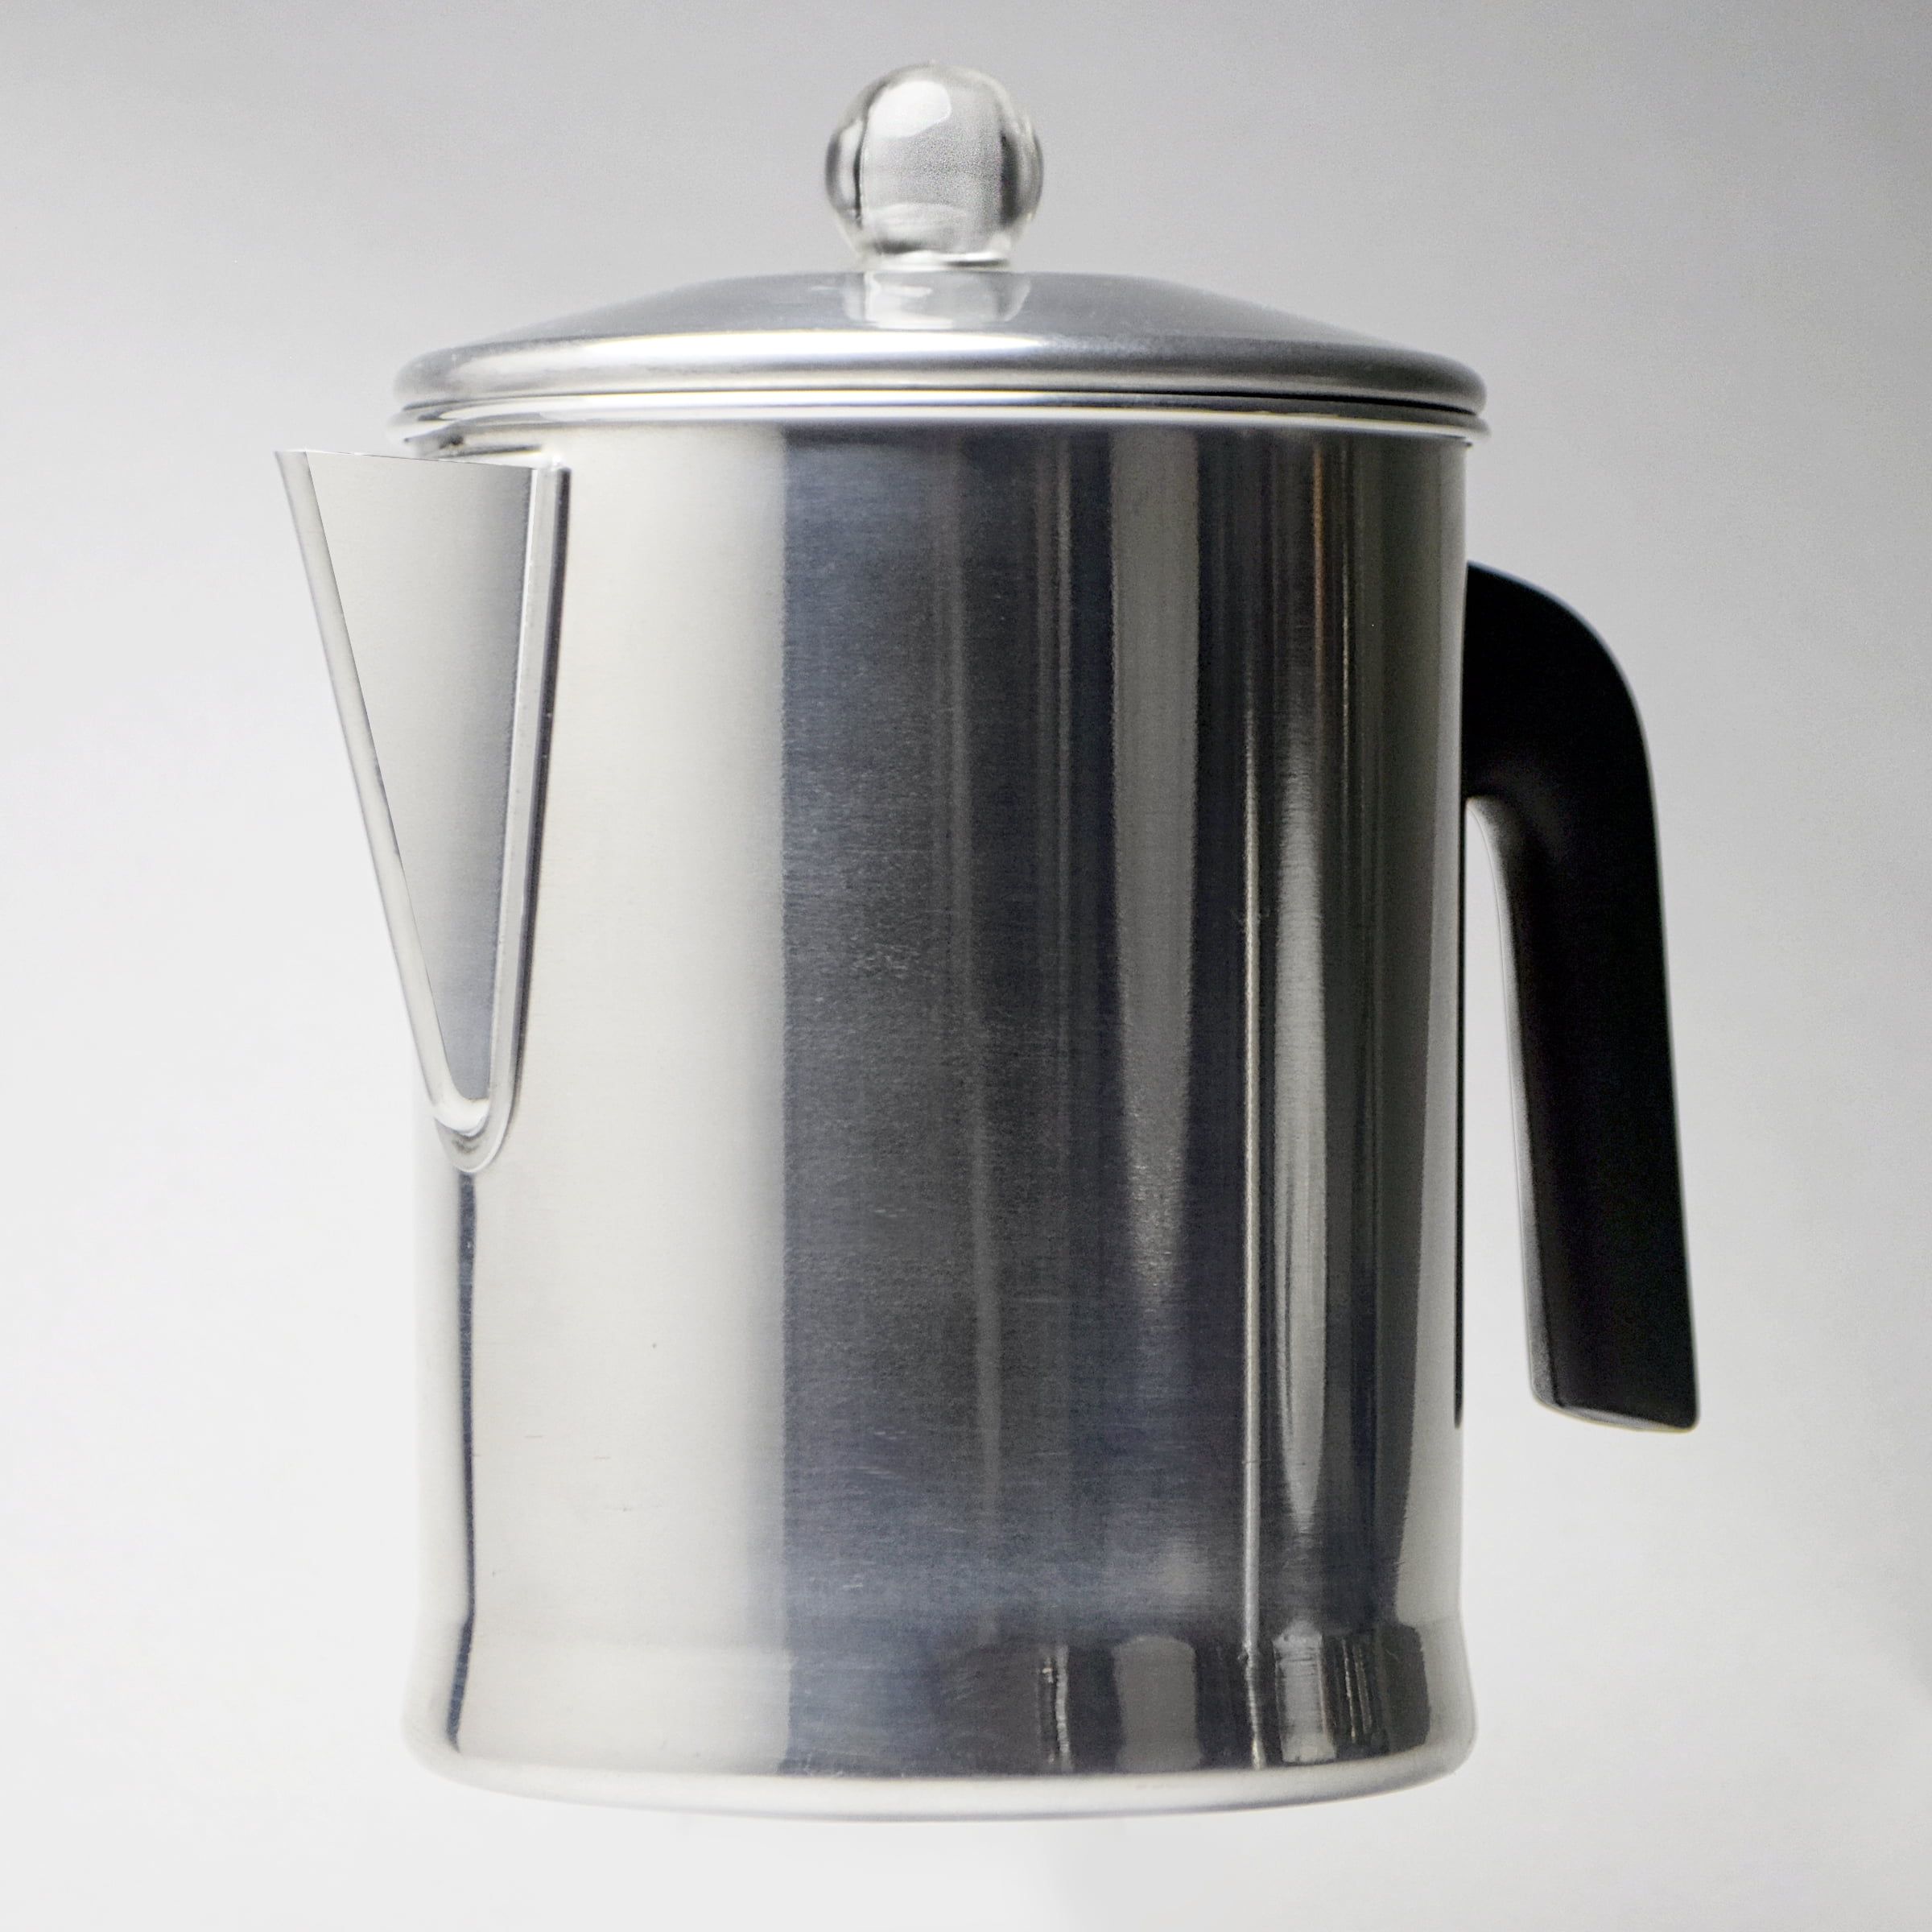 For coffee enthusiasts who crave an authentic and aromatic coffee brewing experience, the Primula Today Coffee Percolator is an absolute must-have. Embrace the classic charm and unparalleled brewing performance this percolator brings to your home, and indulge in the perfect cup of coffee every time.